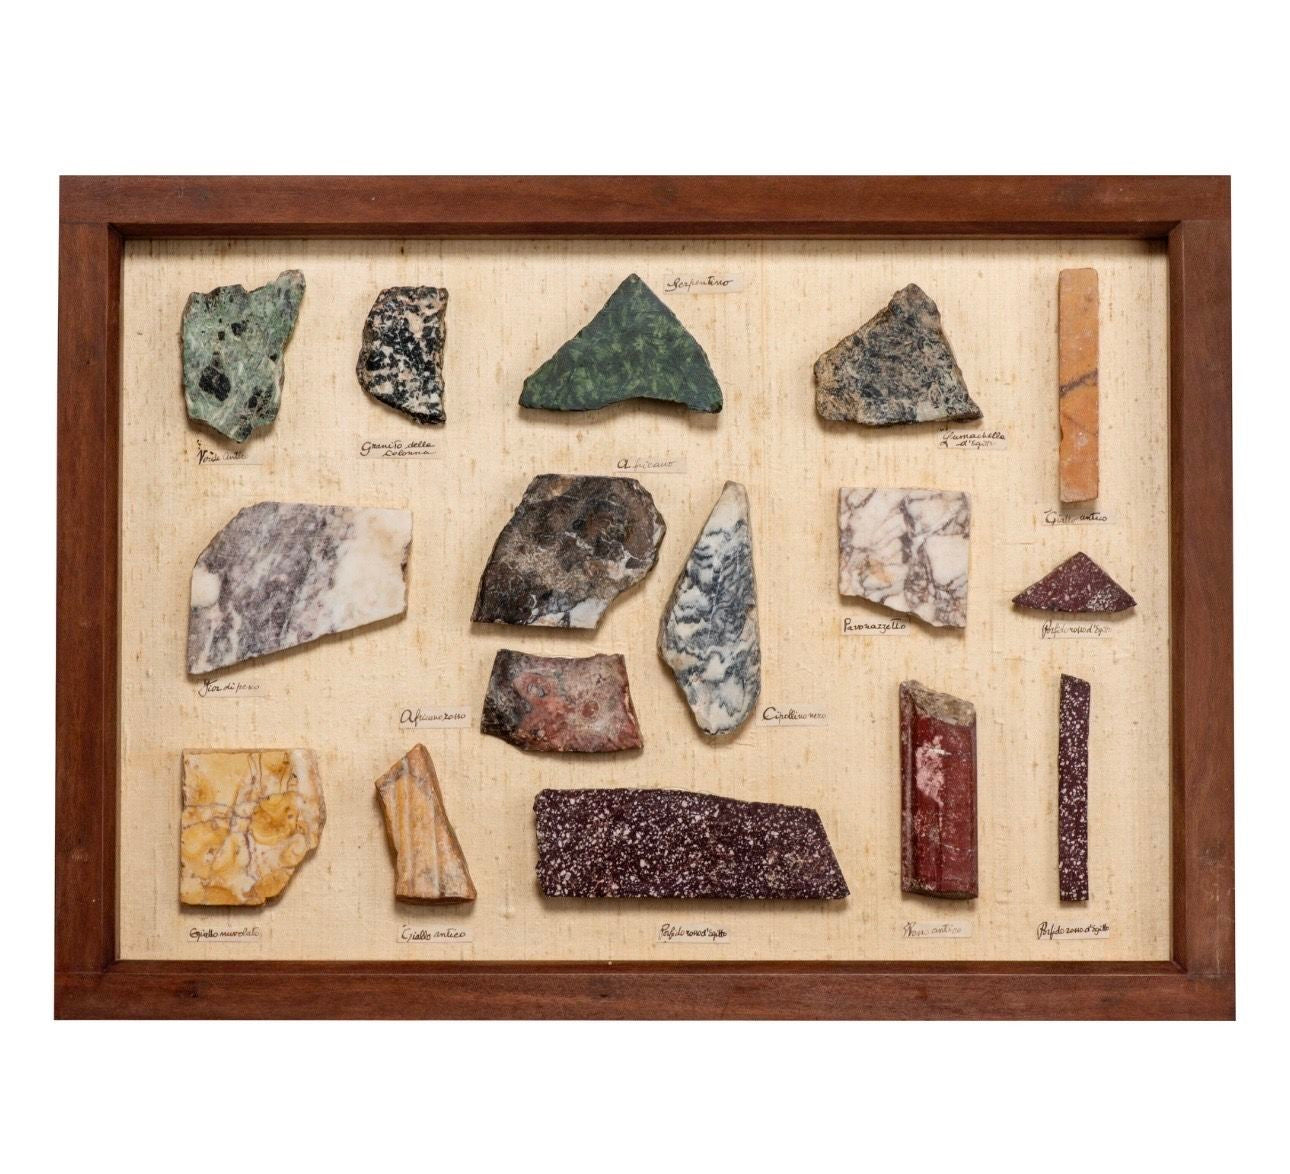 Grand Tour Framed Porphyry and Marble Specimens, 19th Century